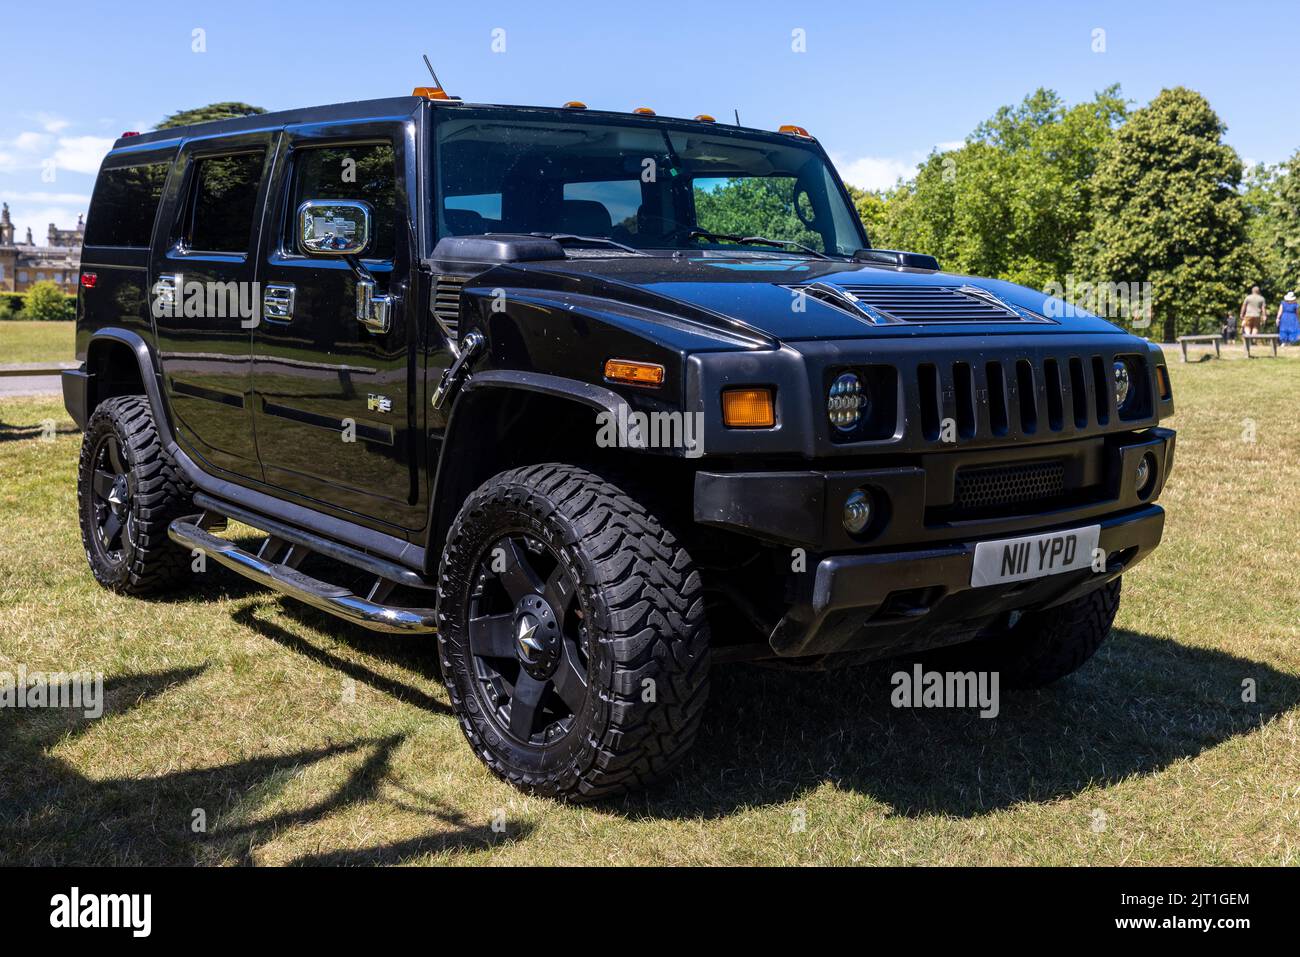 Hummer H2 SUV, on display at the American Auto Club Rally of the Giants, held at Blenheim Palace on the 10th July 2022 Stock Photo